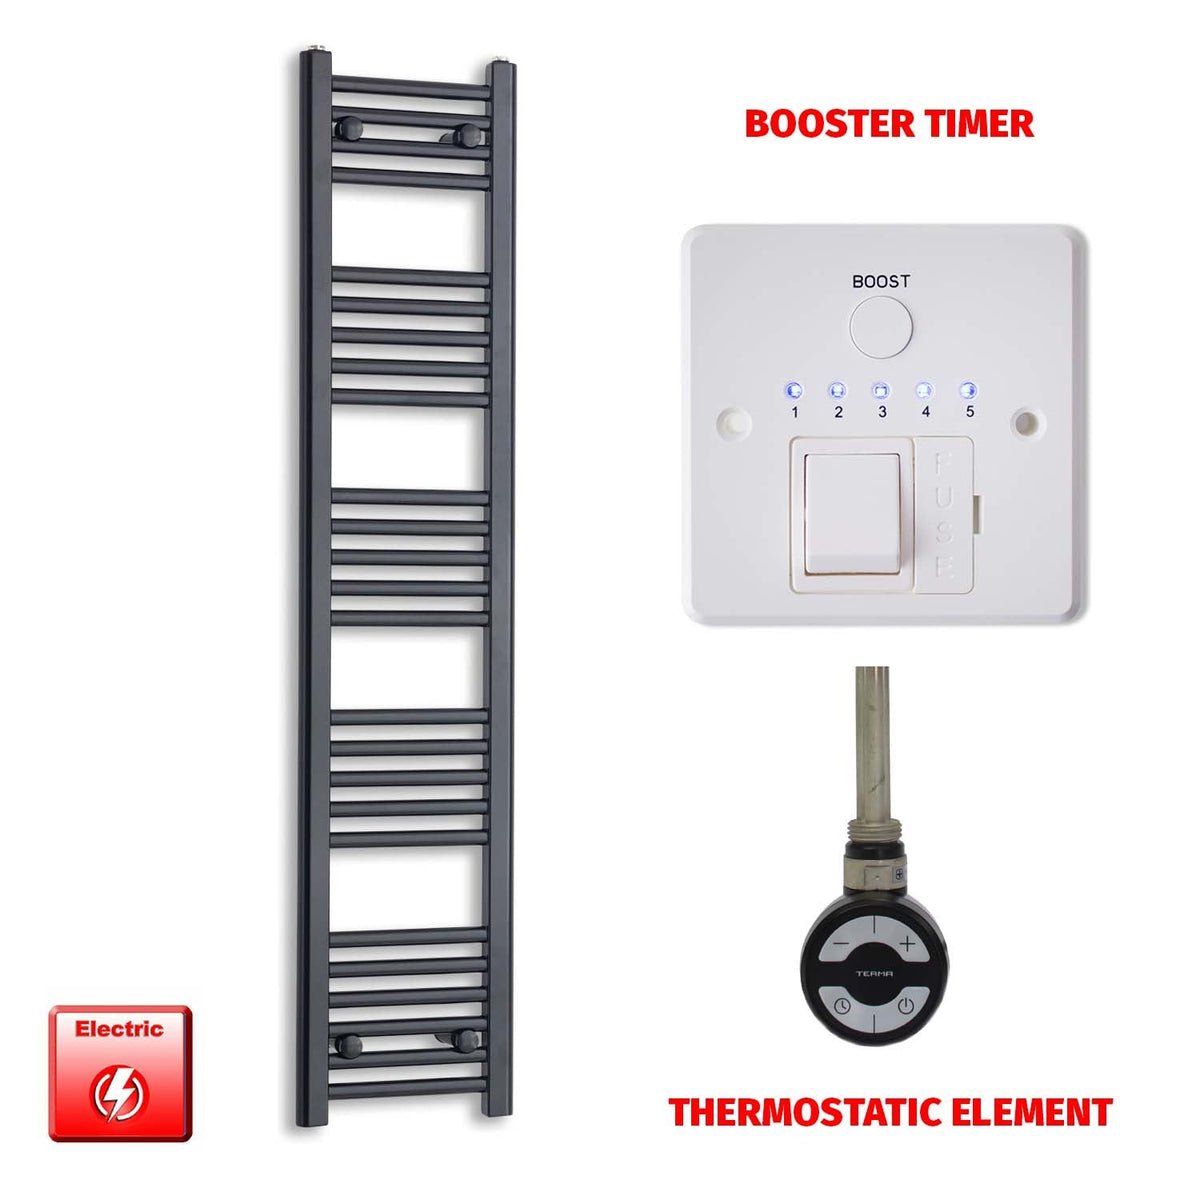 1400 x 300 Flat Black Pre-Filled Electric Heated Towel Radiator HTR MOA Thermostatic Booster Timer